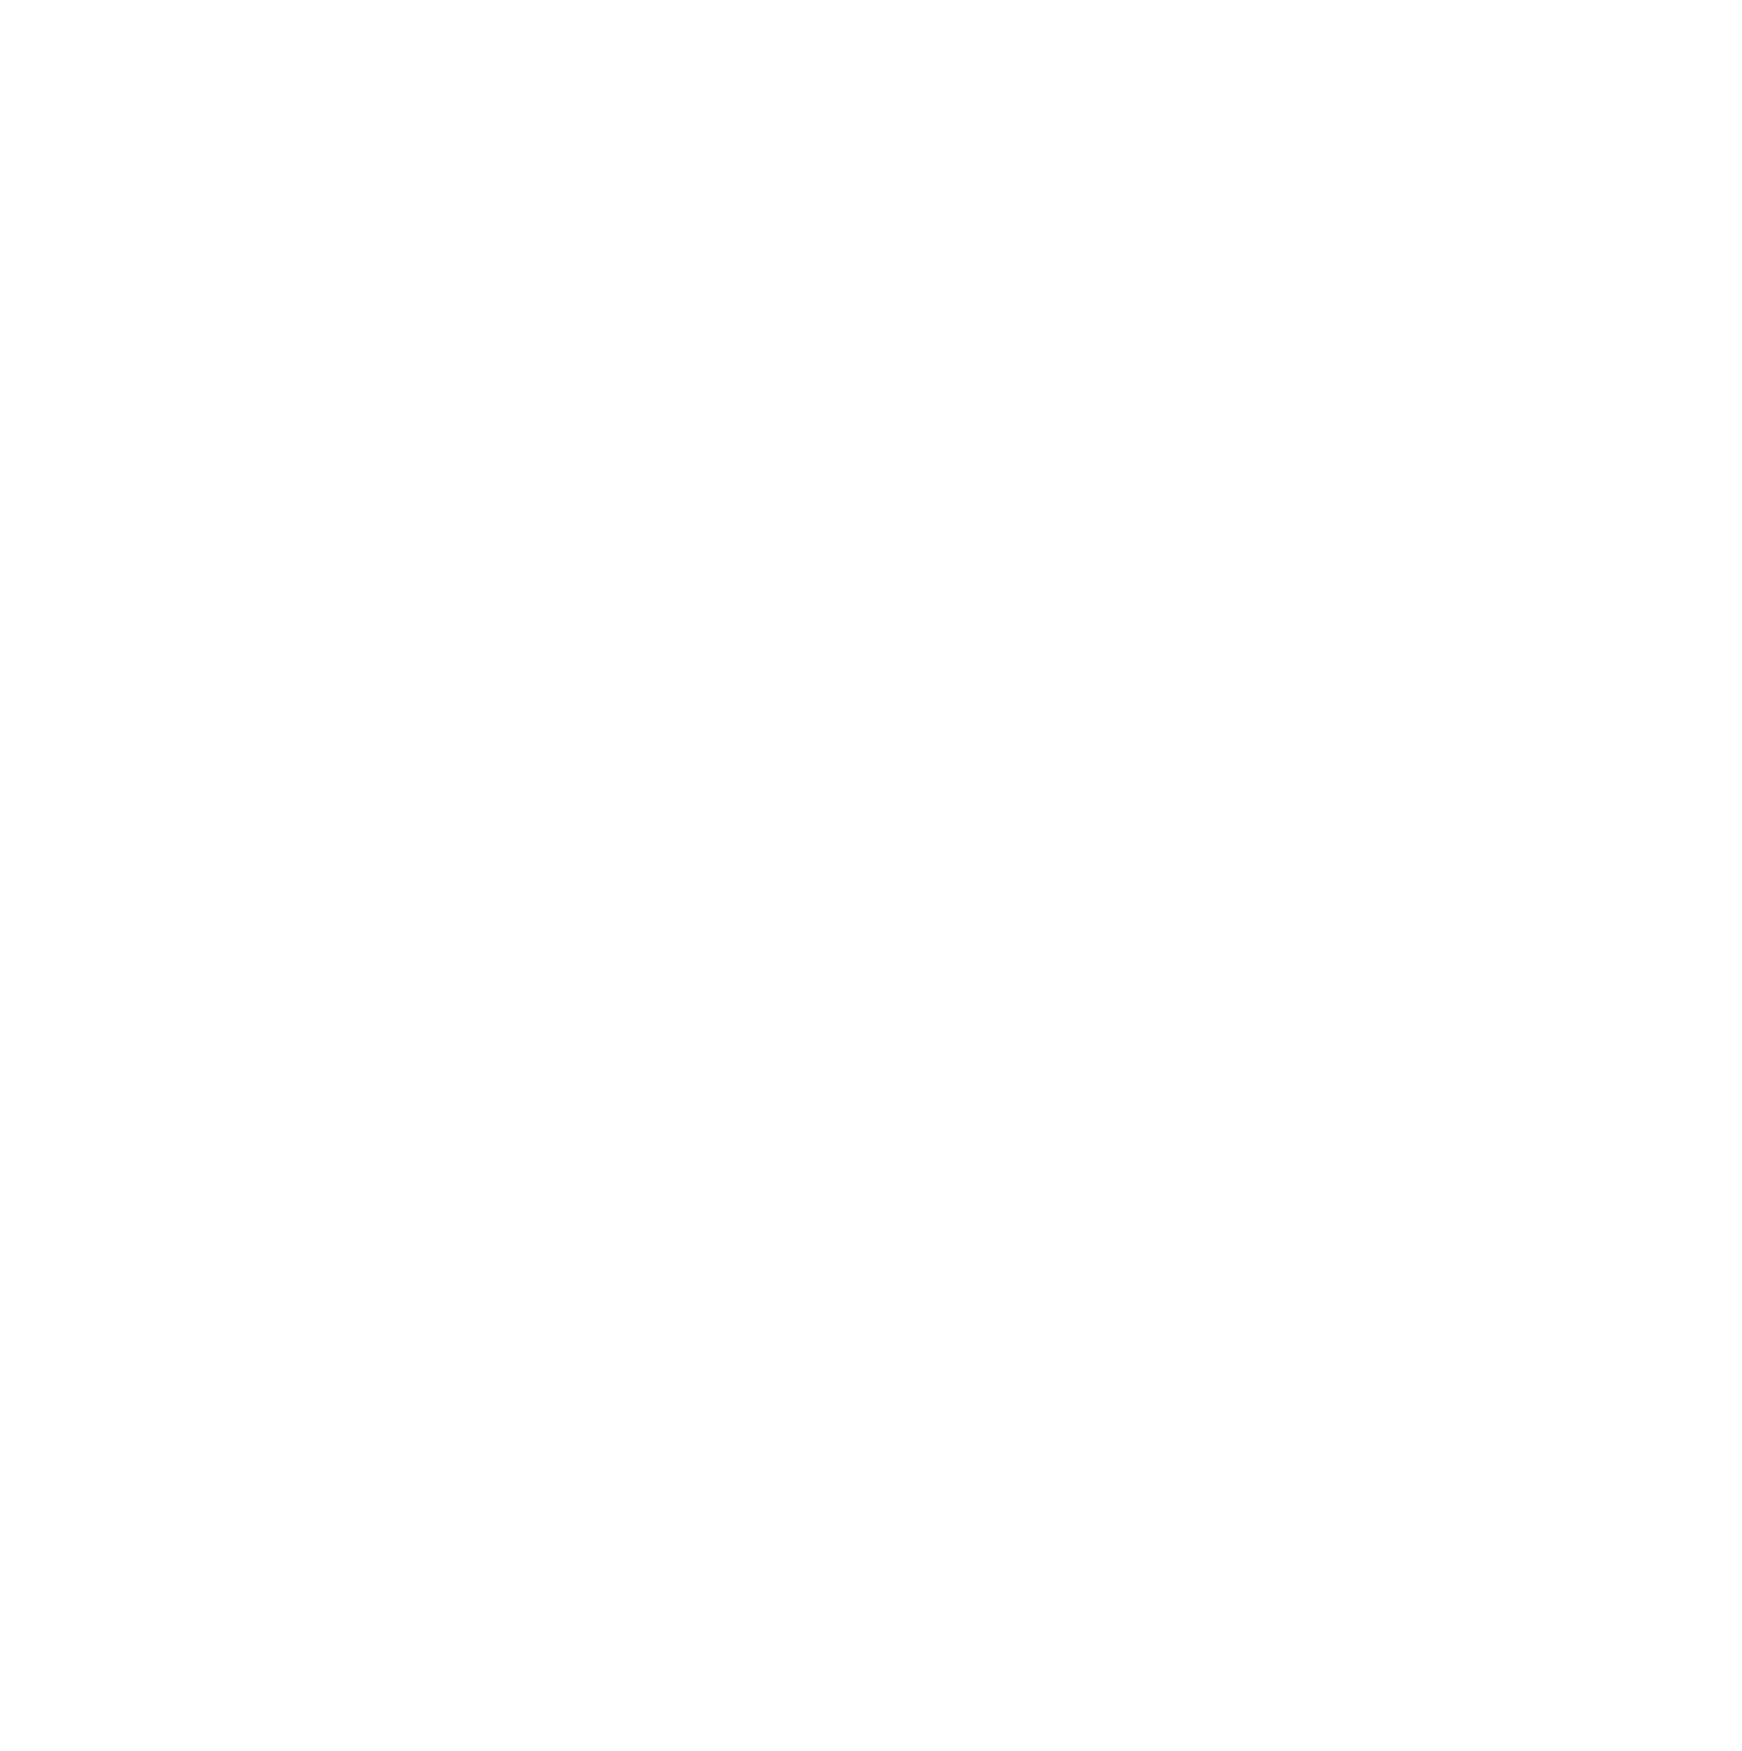 Blues in Town